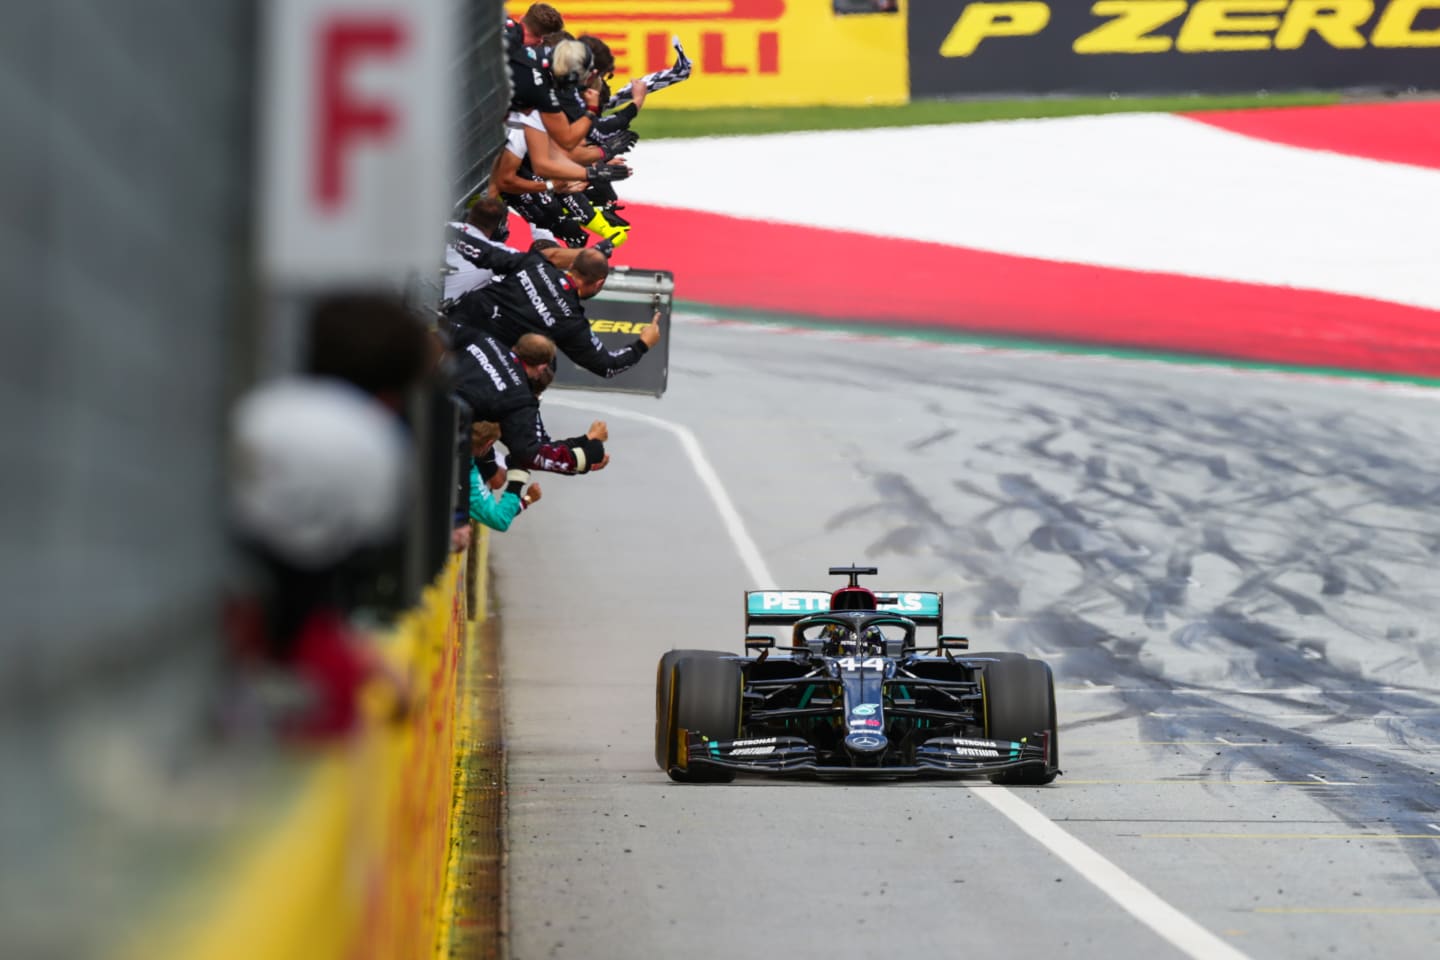 SPIELBERG, AUSTRIA - JULY 12: Lewis Hamilton of Mercedes and Great Britain during the Formula One Grand Prix of Styria at Red Bull Ring on July 12, 2020 in Spielberg, Austria. (Photo by Peter Fox/Getty Images)